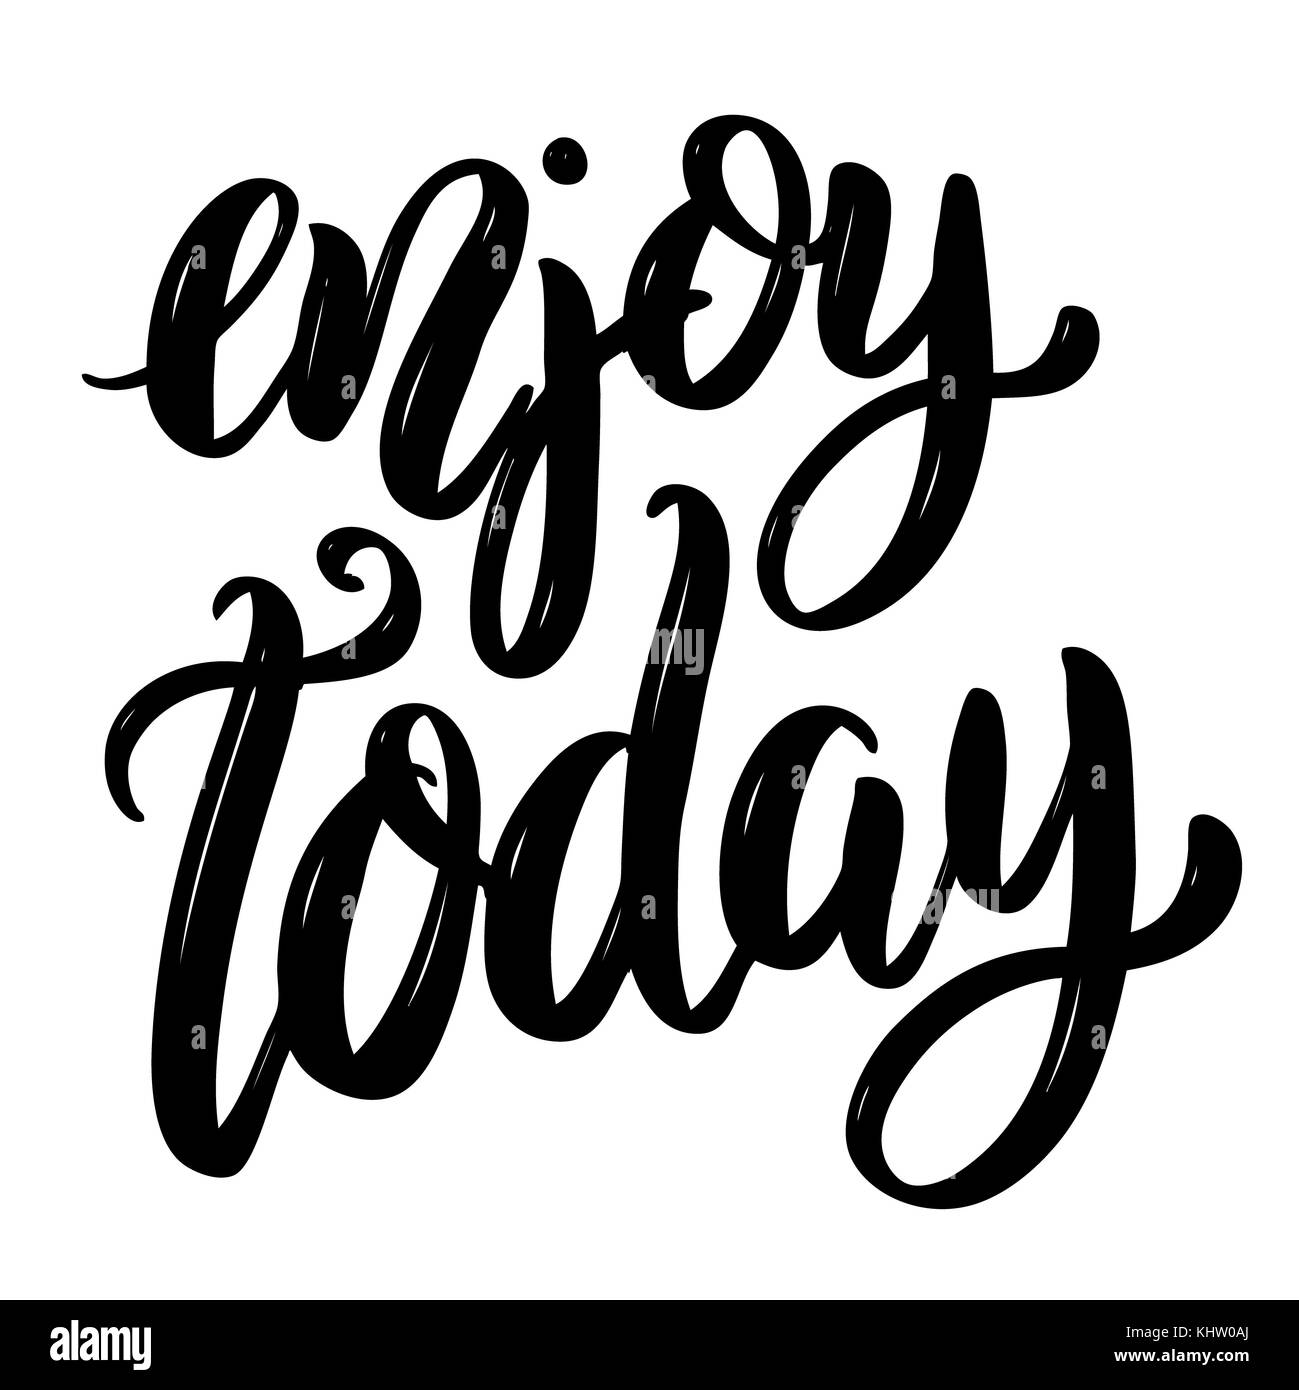 Enjoy today. Hand drawn motivation lettering quote. Design element for poster, banner, greeting card. Vector illustration Stock Photo